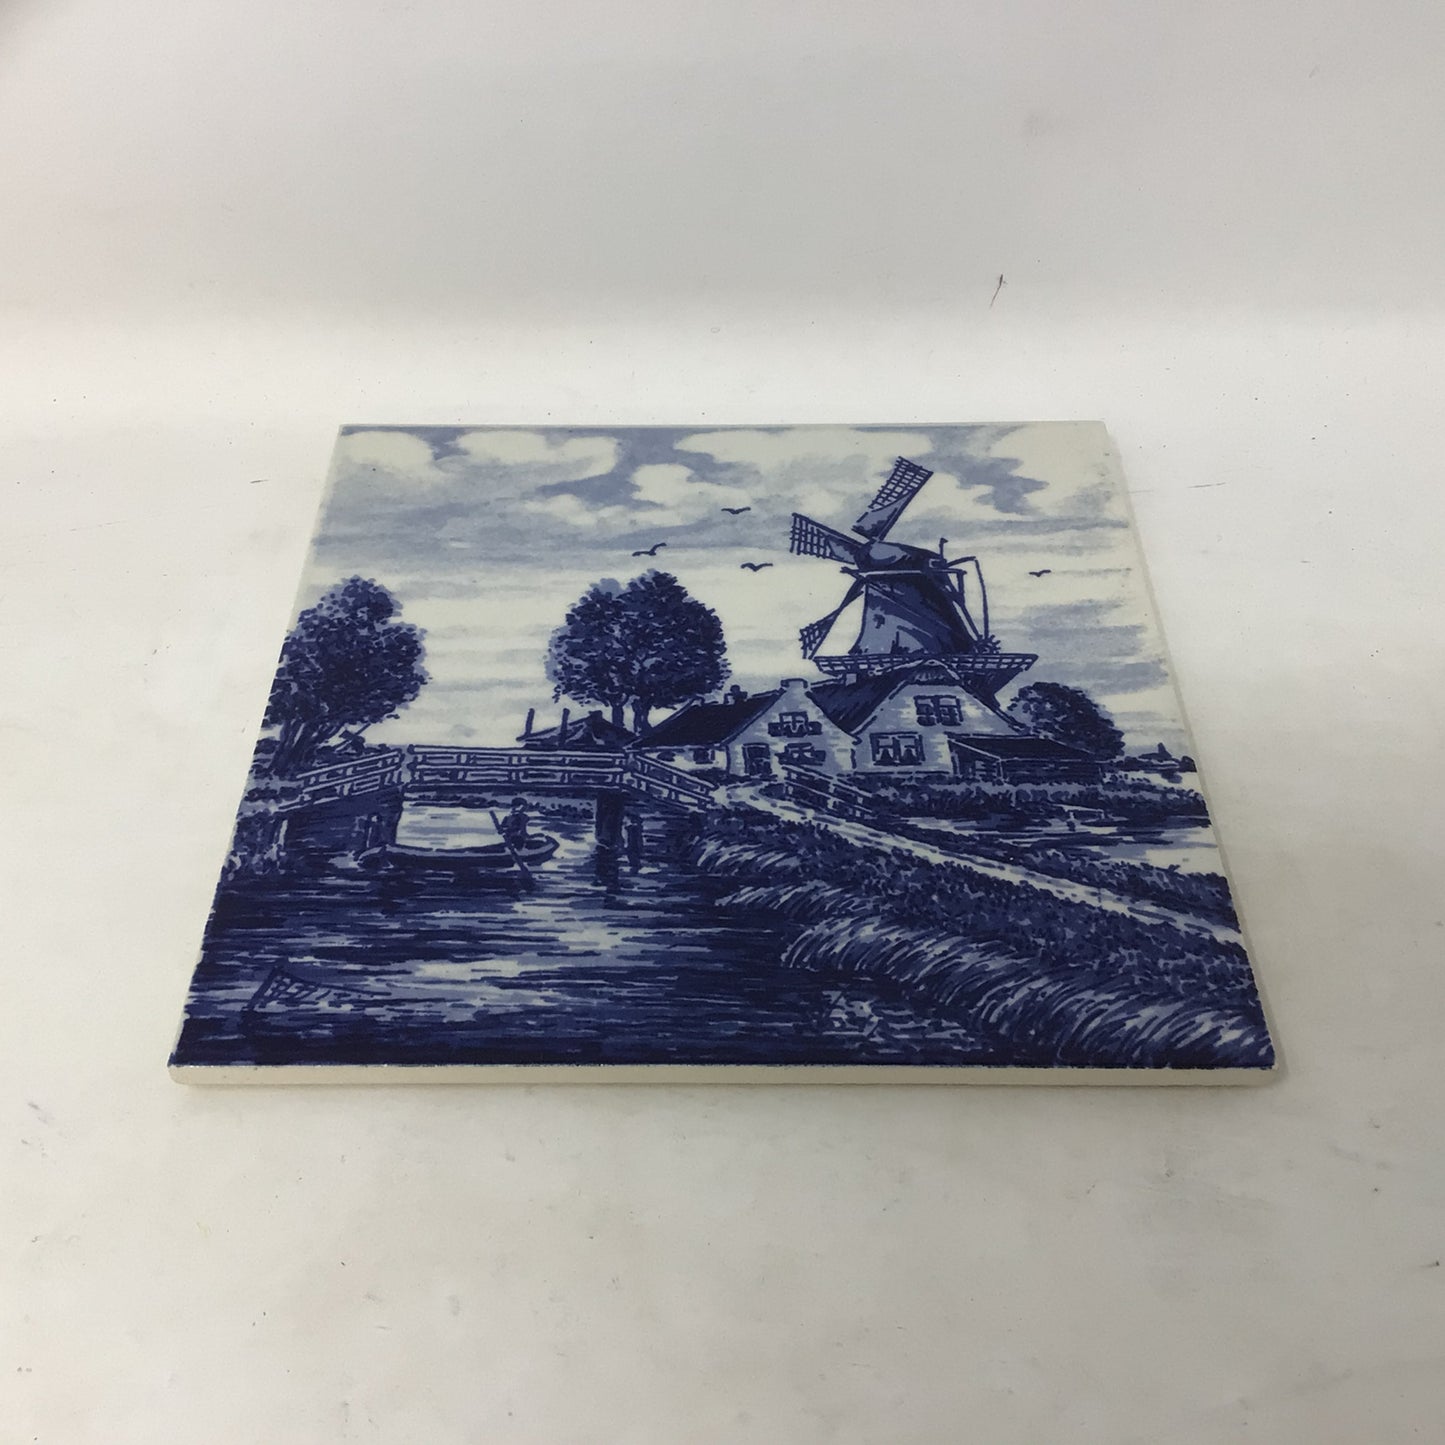 Hand painted Delft Blue and White Ceramic Tile